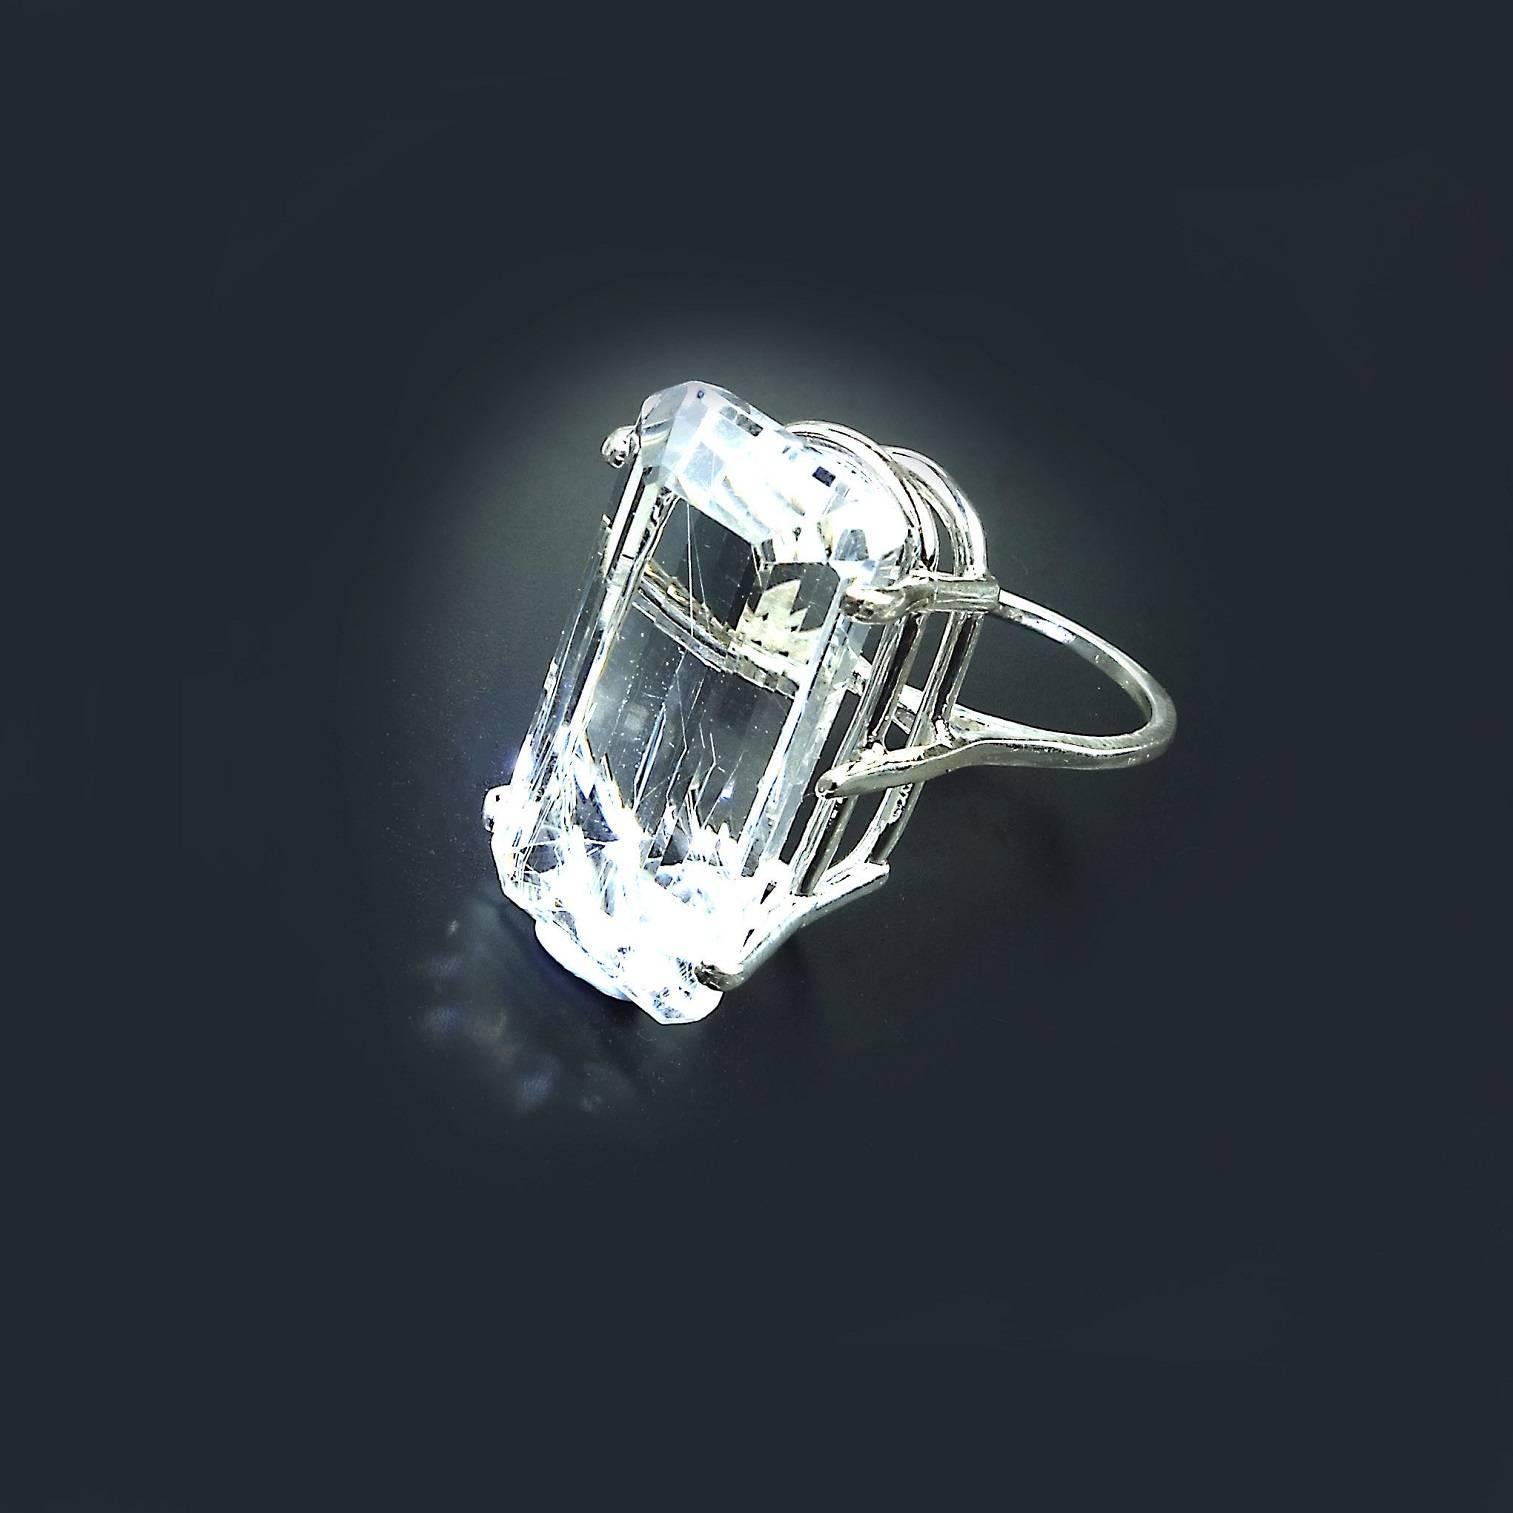 Custom made, sparkling Silver Topaz Emerald Cut Gemstone set in Sterling Silver Ring. This magnificent Silver Topaz is stunning! It reaches from knuckle to knuckle and flashes with every motion of your hand. It is approximately 50 carats of delight.